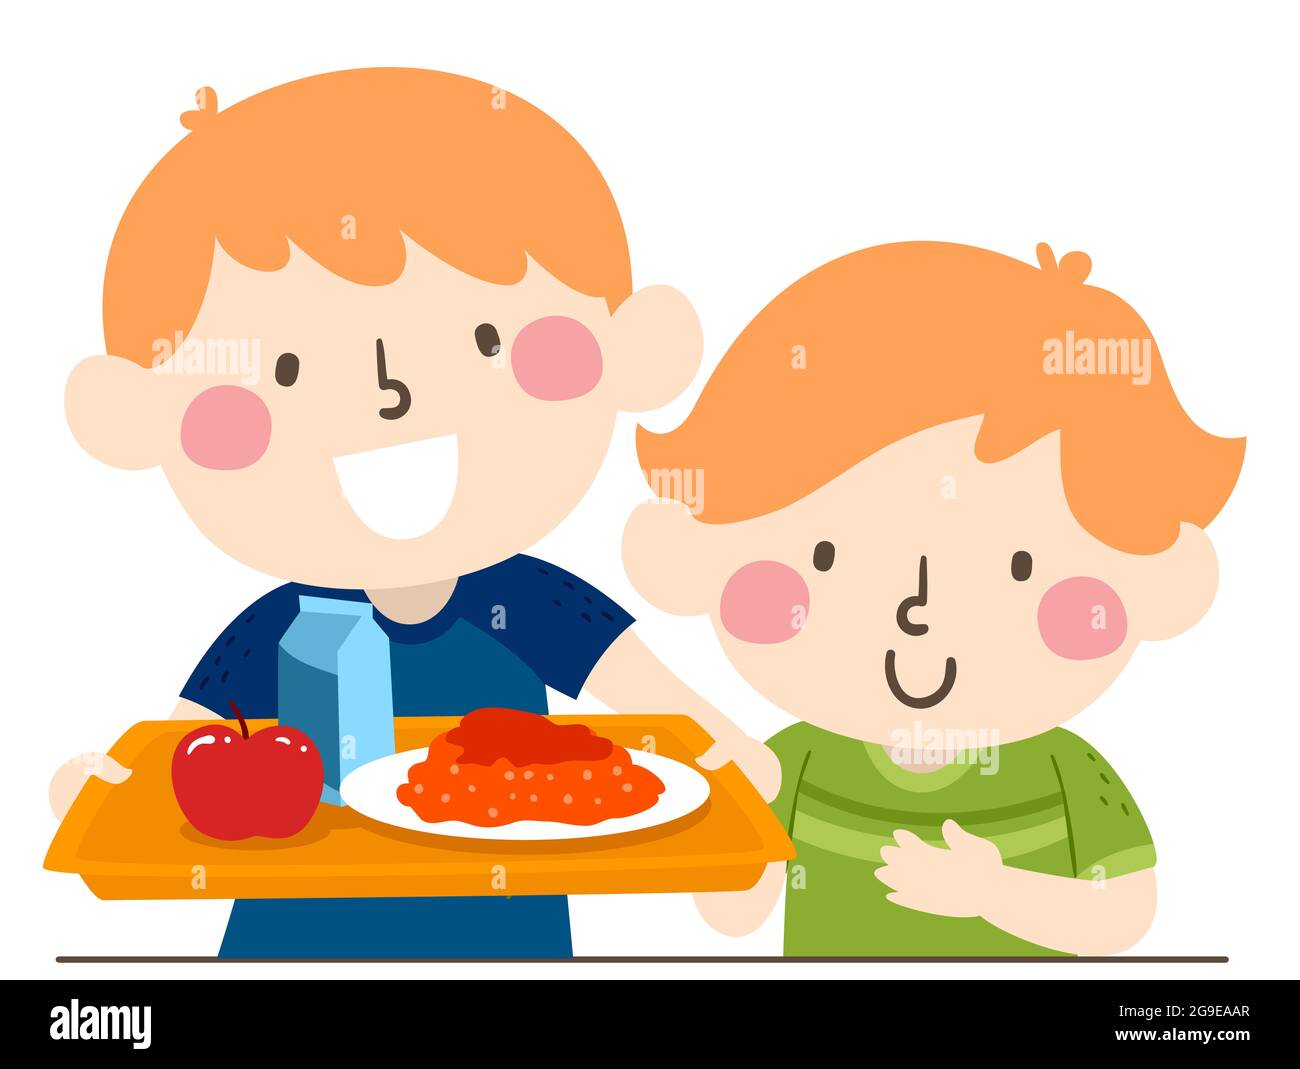 Illustration of a Kid Boy Helping Younger Siblings with Packed Lunch Stock Photo